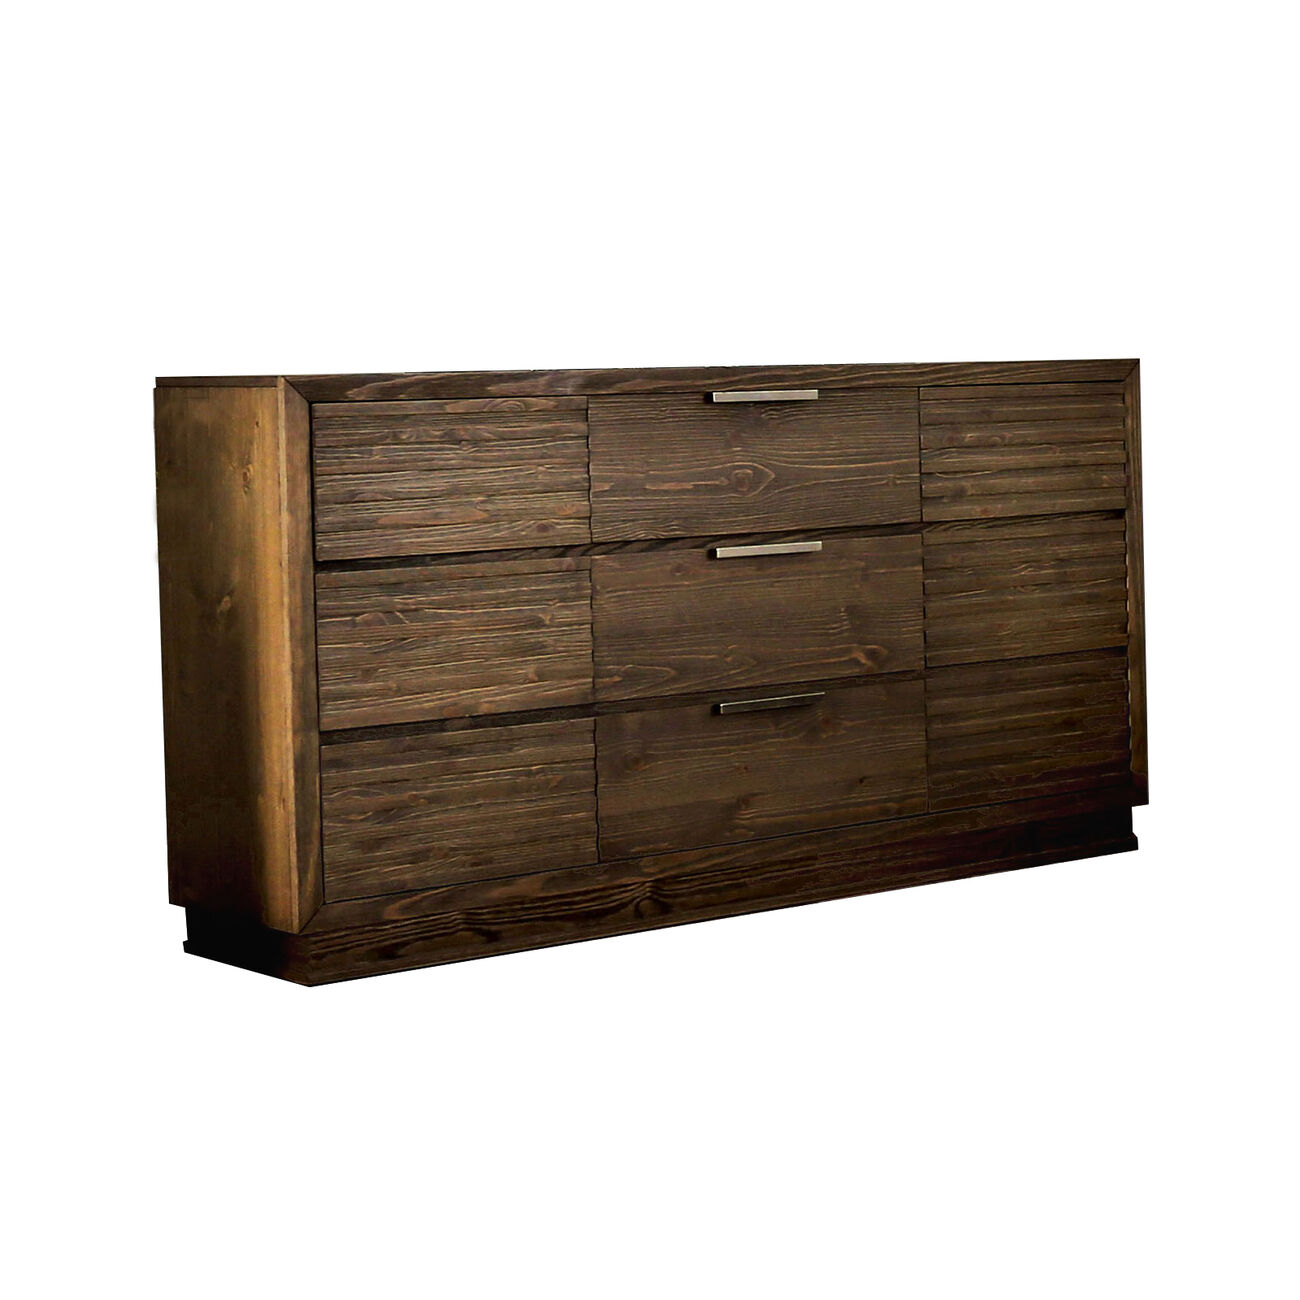 9 Drawer Rustic Style Wooden Dresser with Finger Pull Handles, Brown